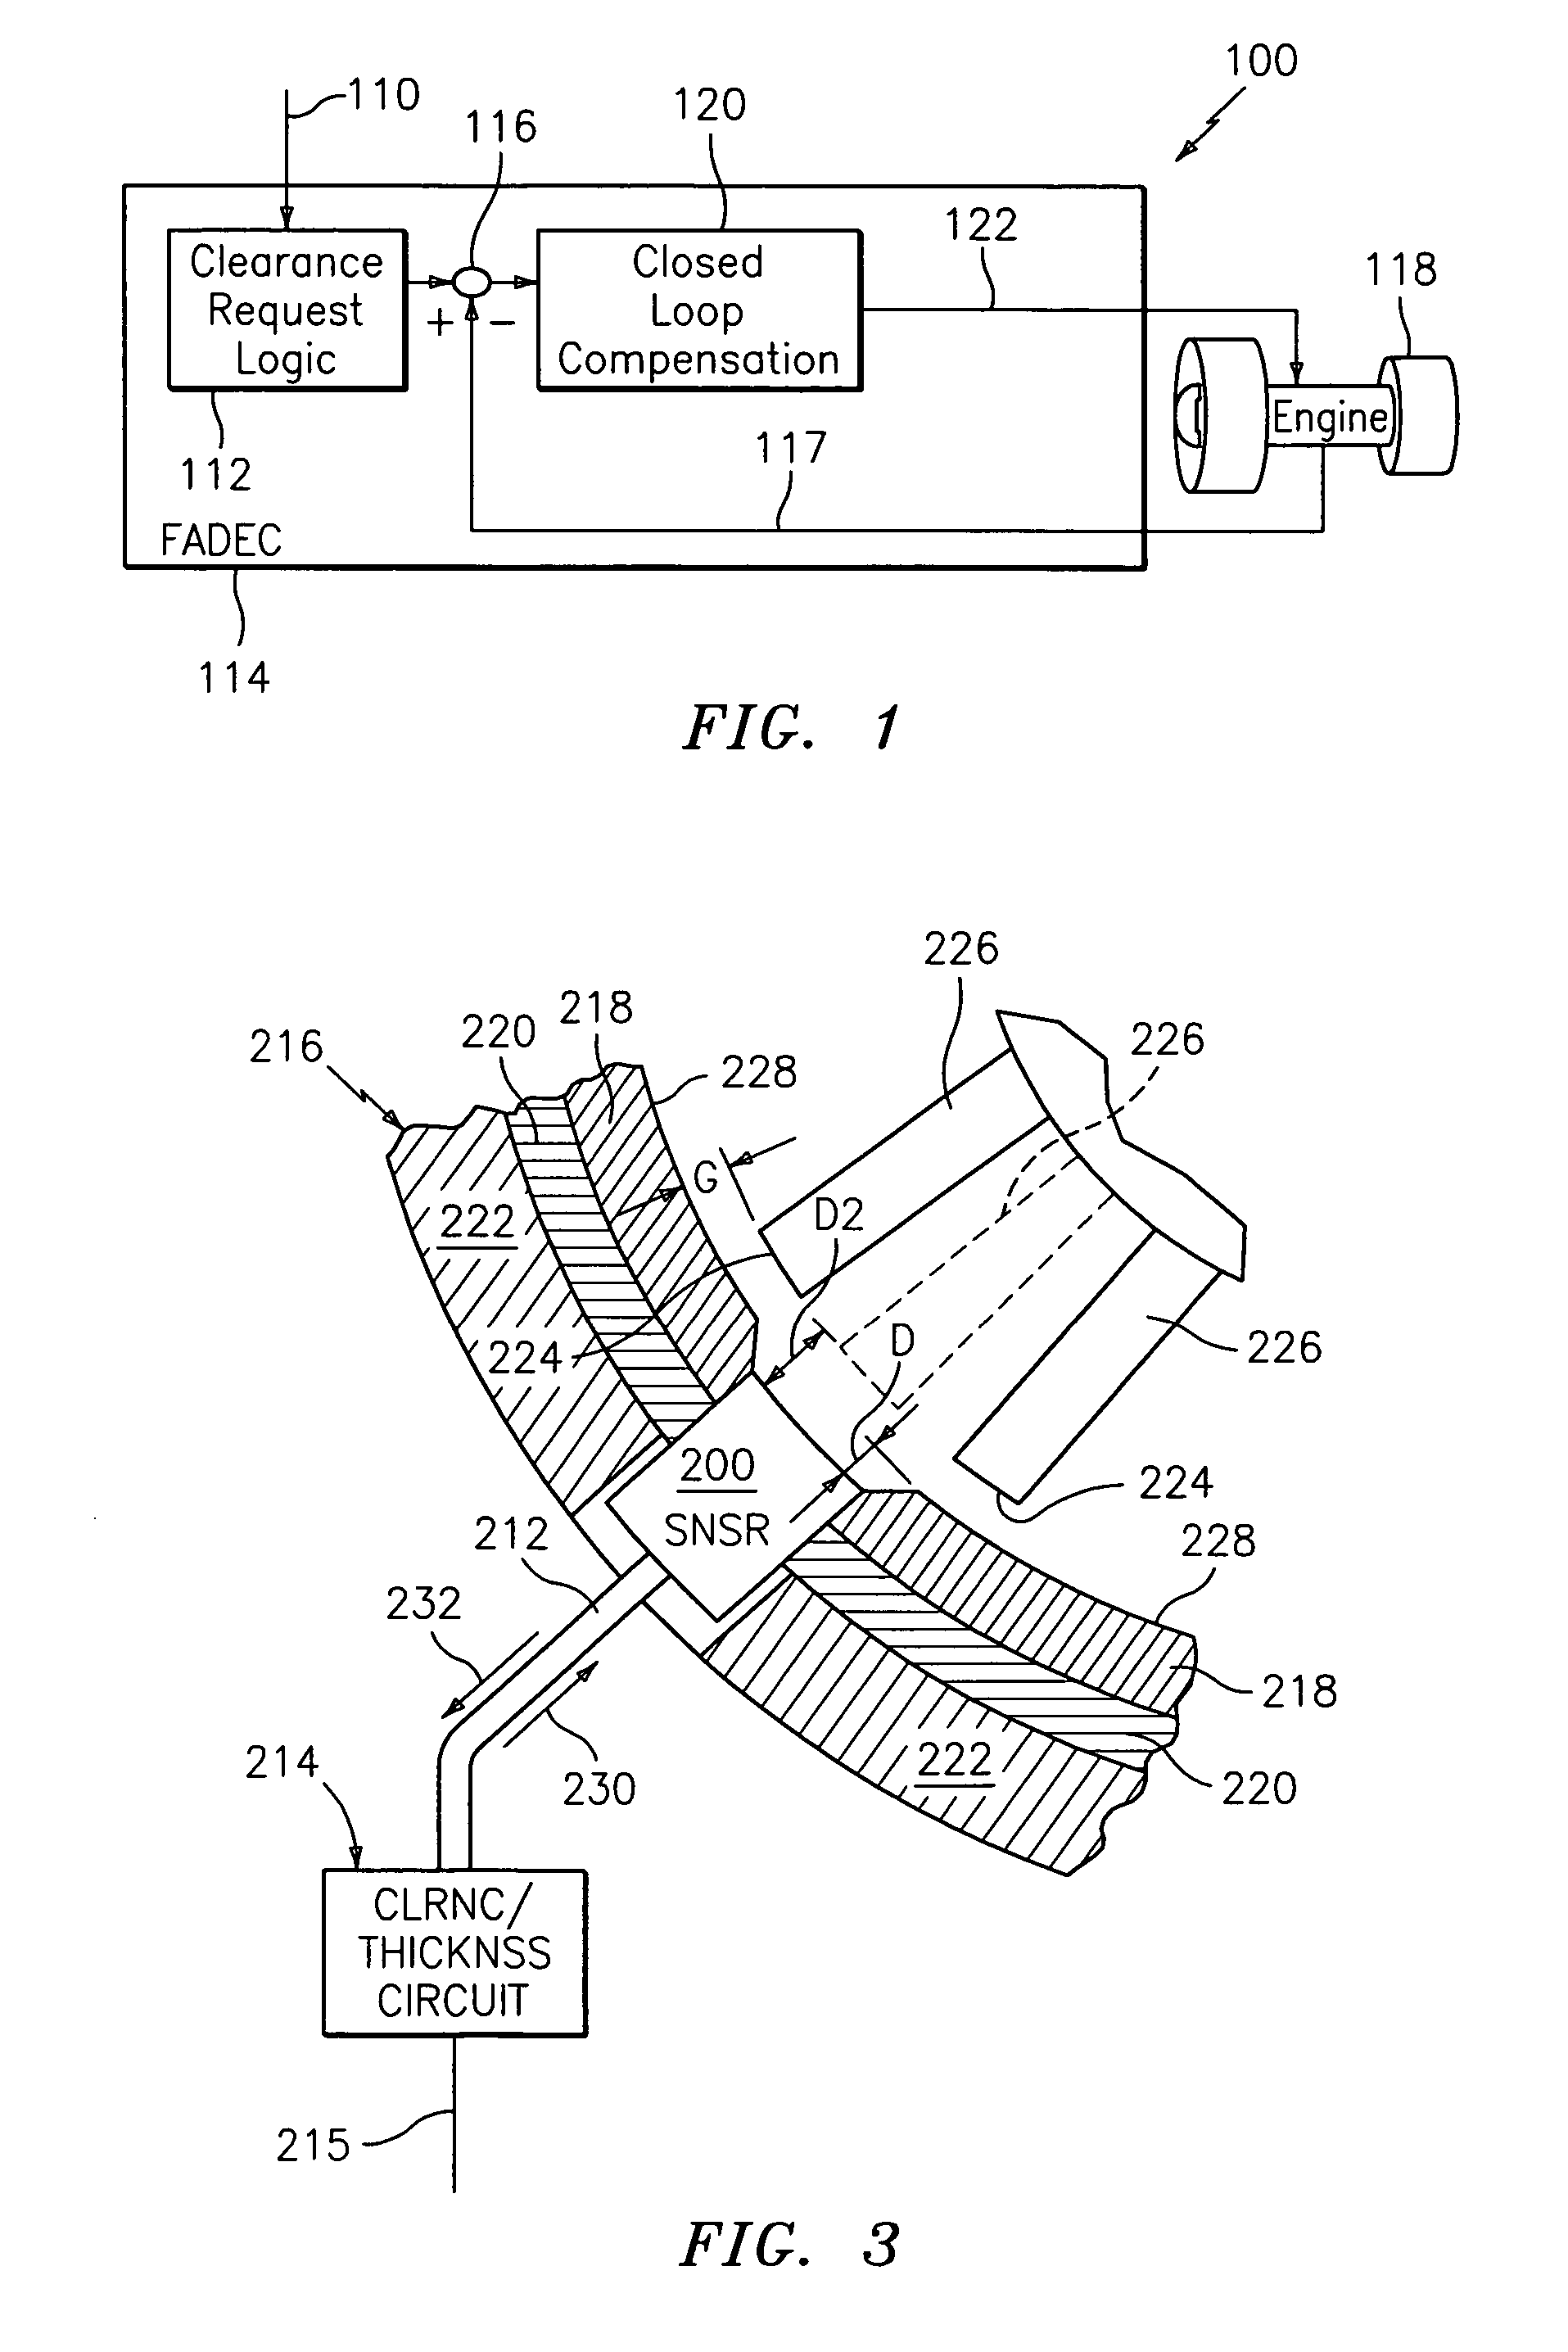 Systems and methods for monitoring thermal growth and controlling clearances, and maintaining health of turbo machinery applications